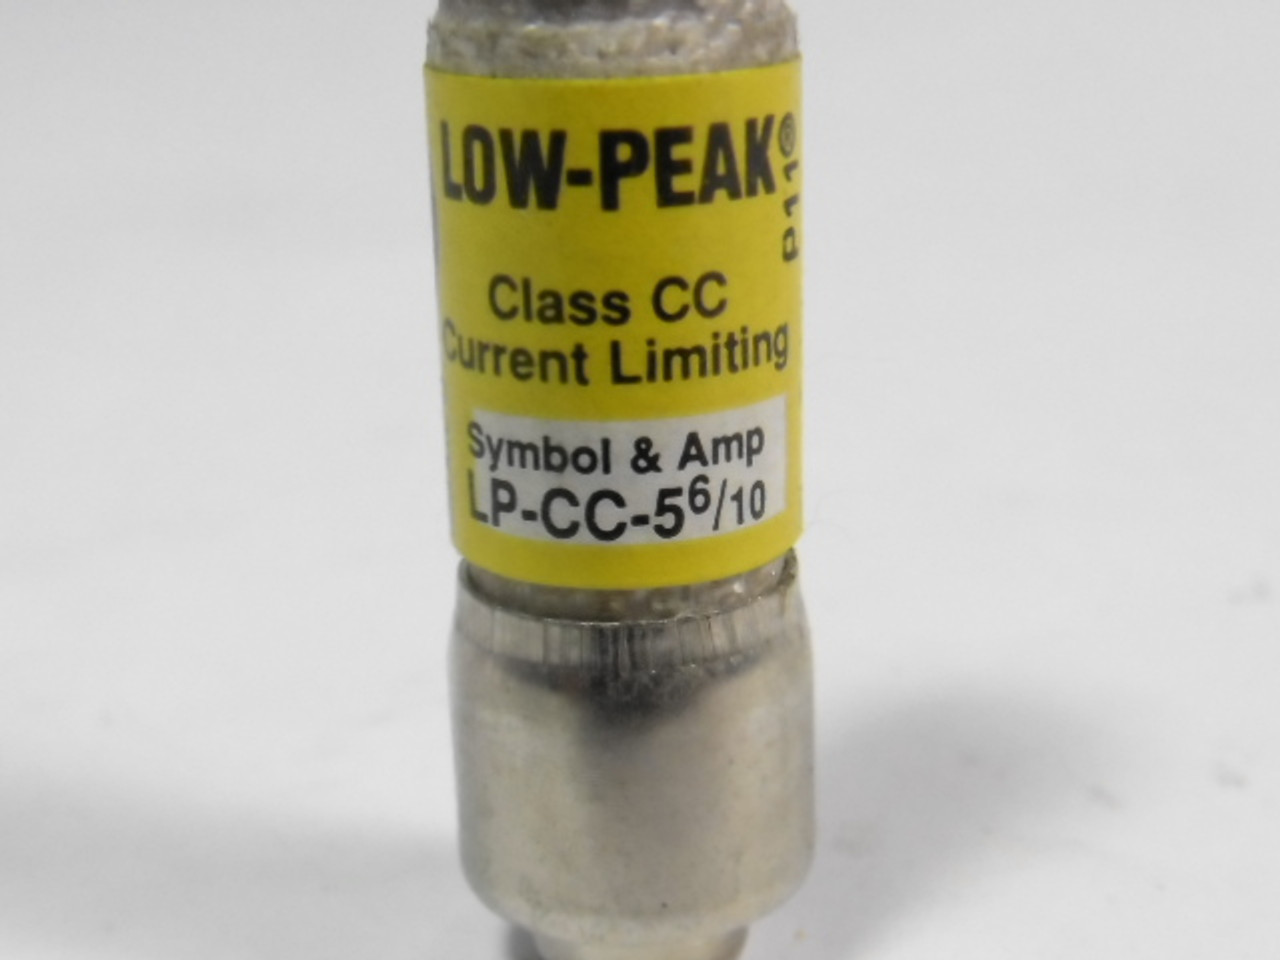 Low-Peak LP-CC-5-6/10 Current Limiting Fuse 5-6/10A 600V USED